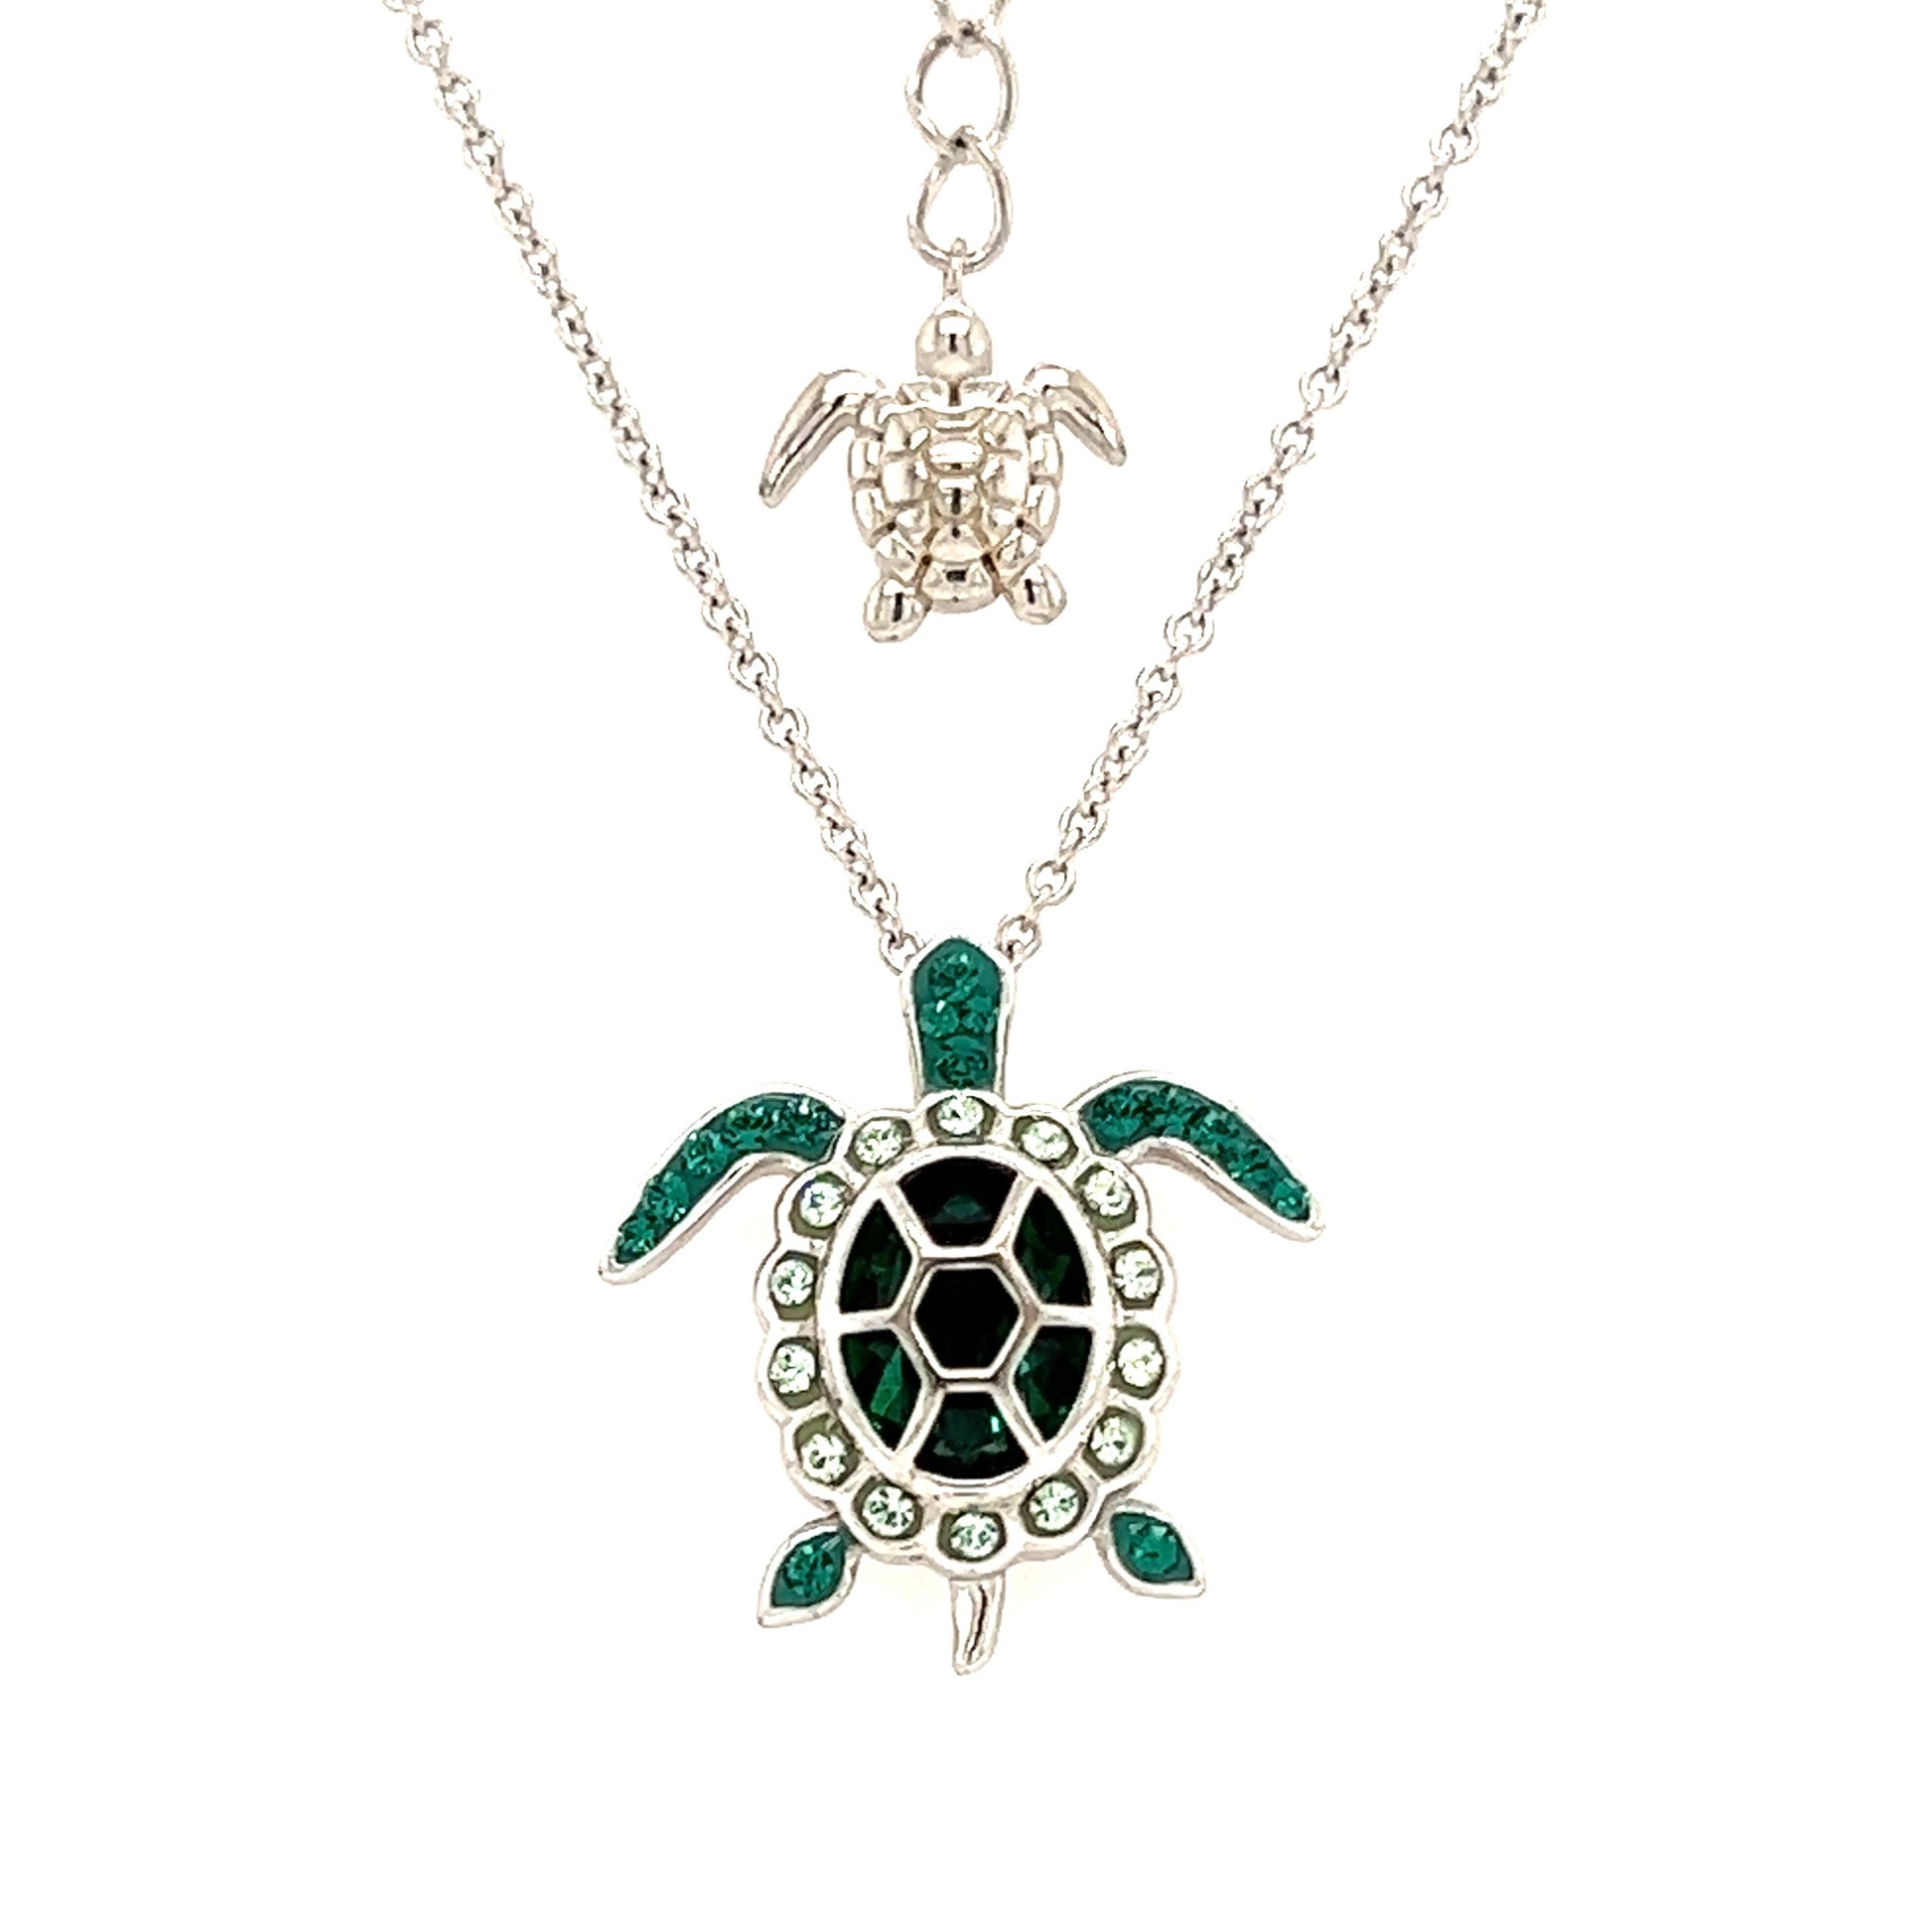 Sea Turtle Necklace with Deep Green Crystals in Sterling Silver. Pendant and End Front View